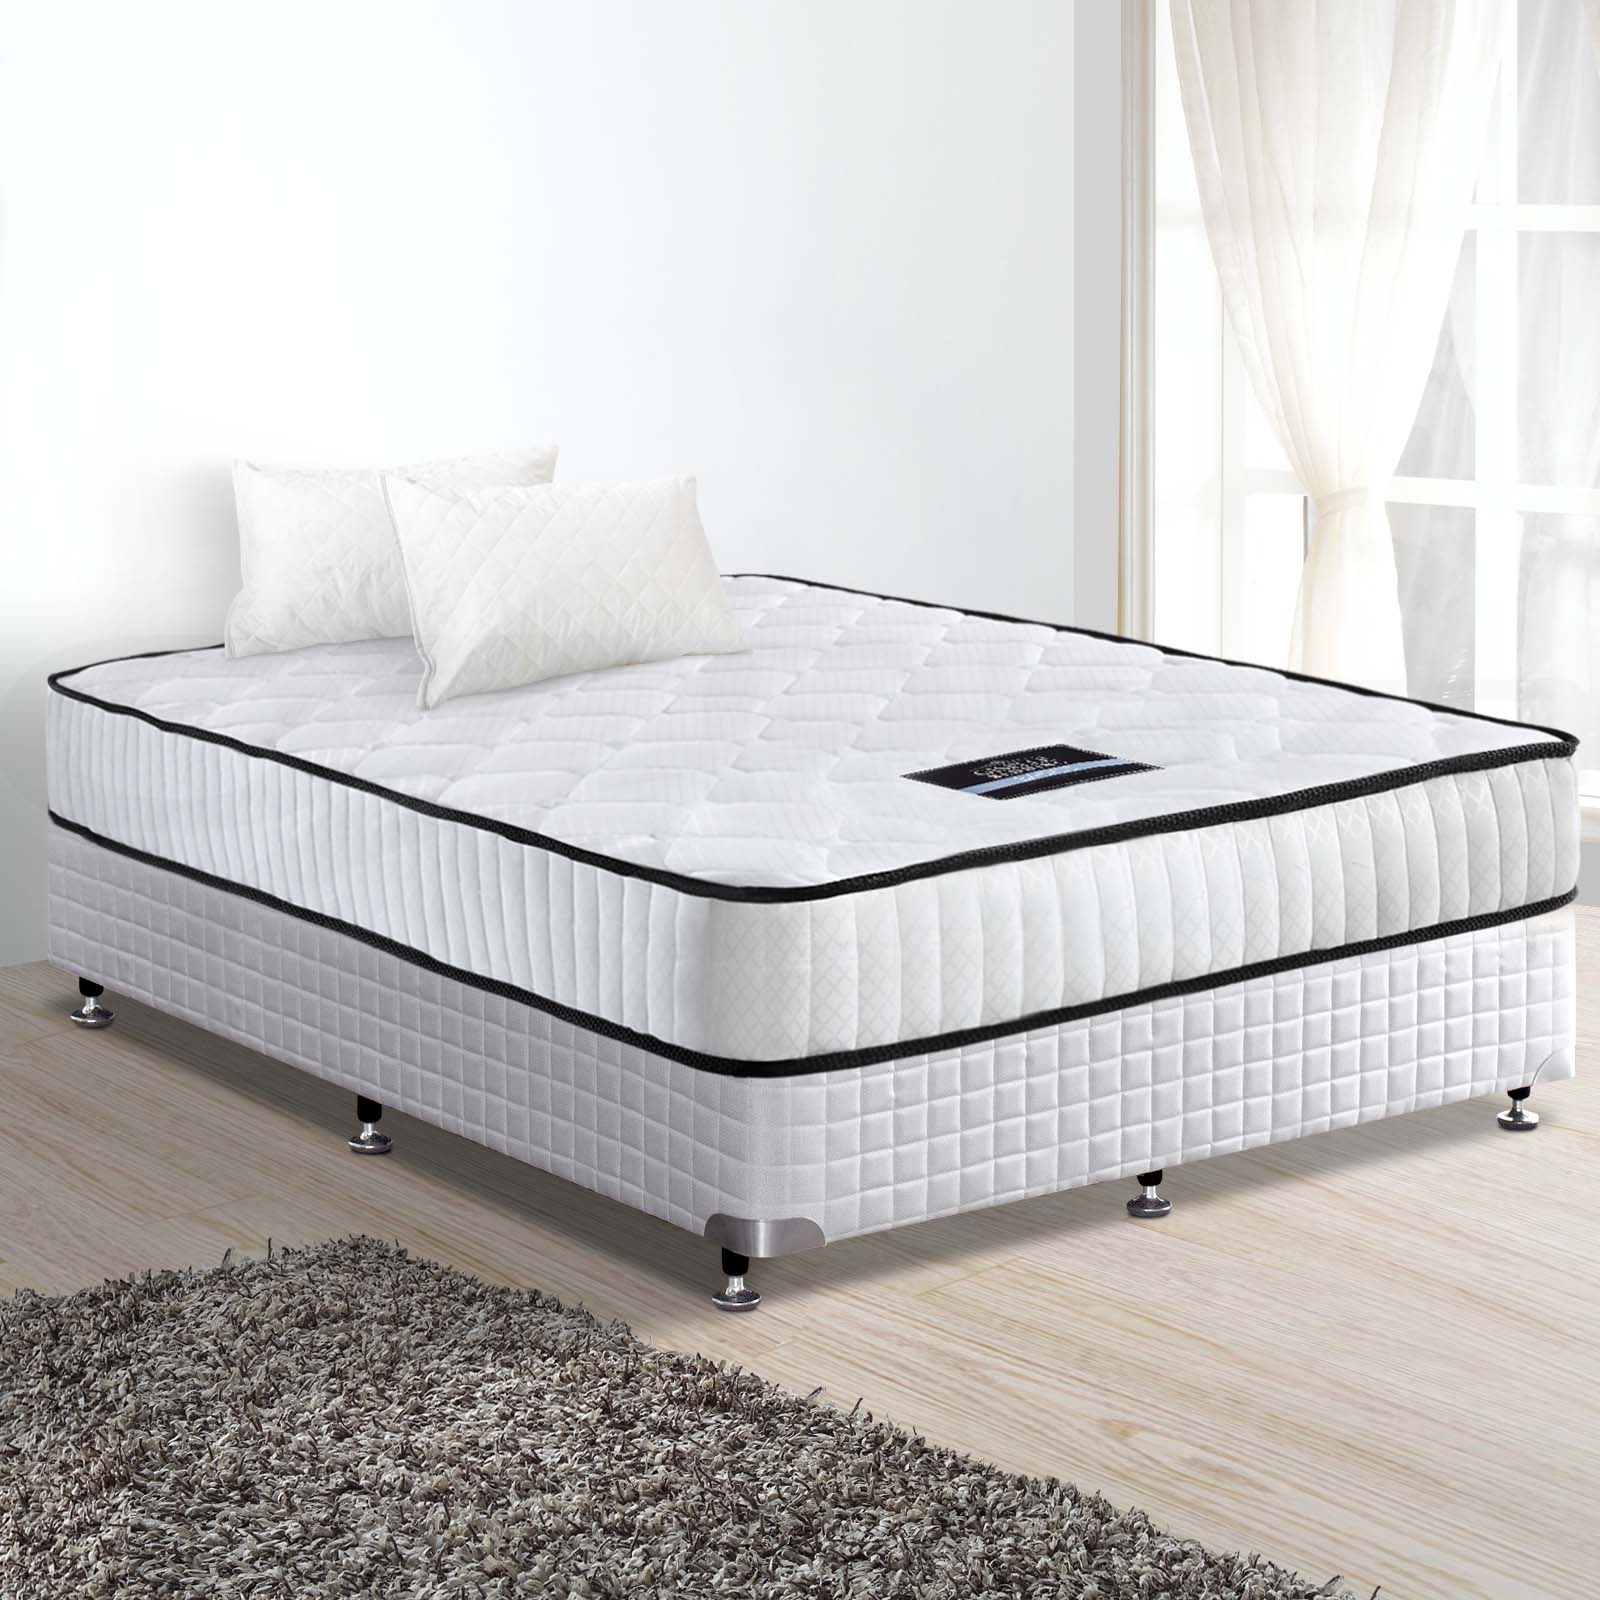 Queen Double King Single Mattress Bed Size Pocket Spring